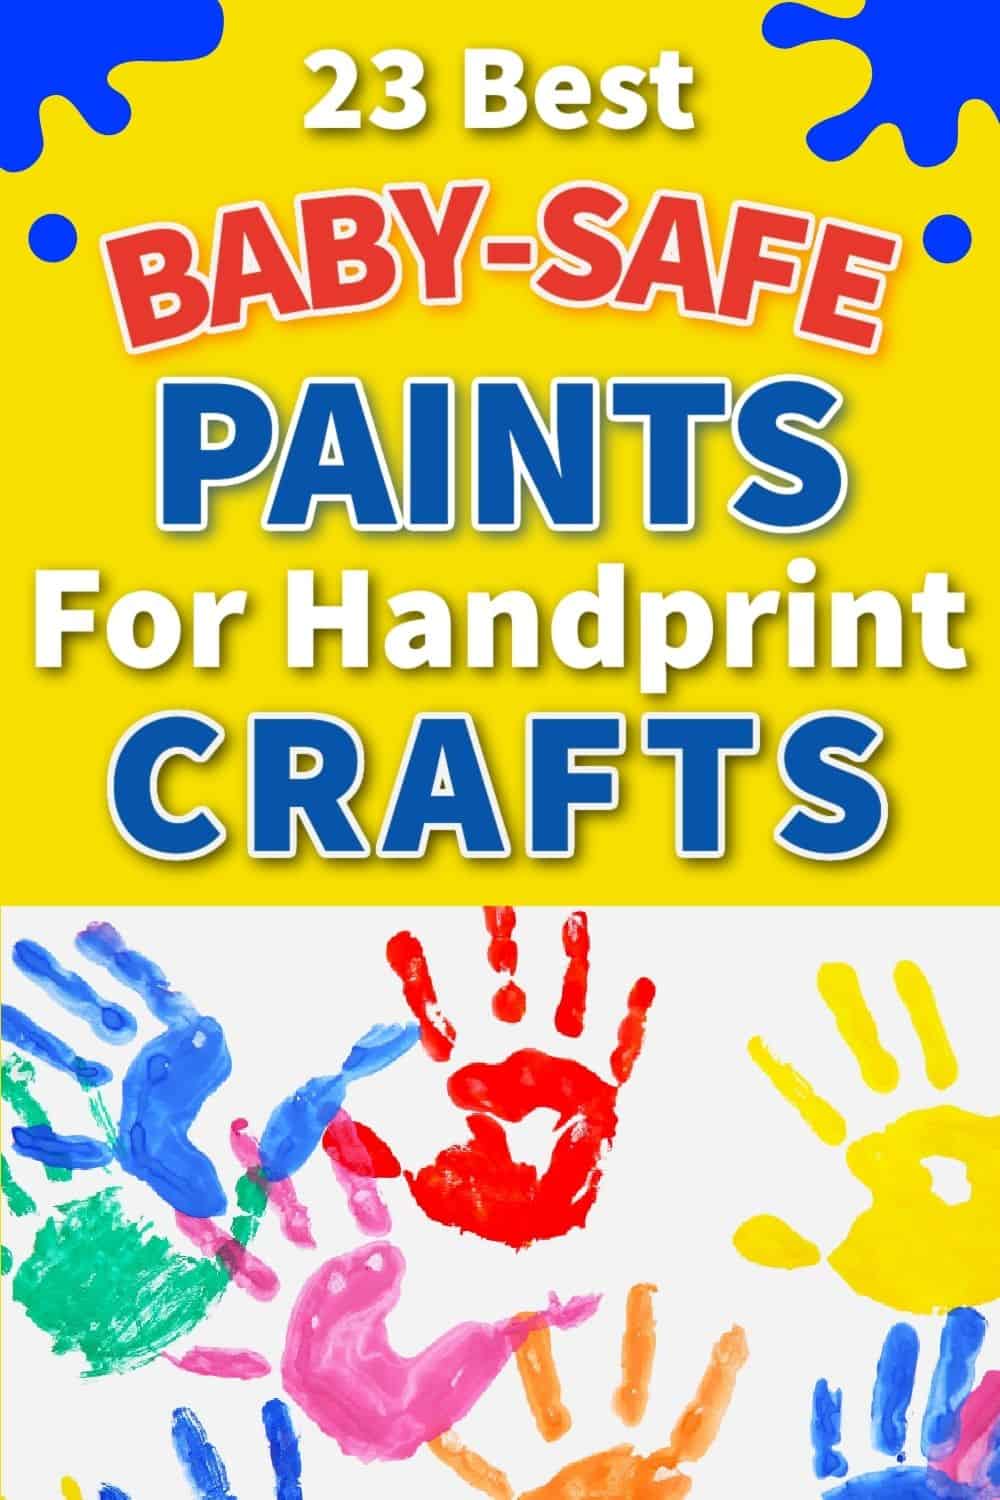 23 Best baby safe paints & materials for hand and footprint arts and crafts